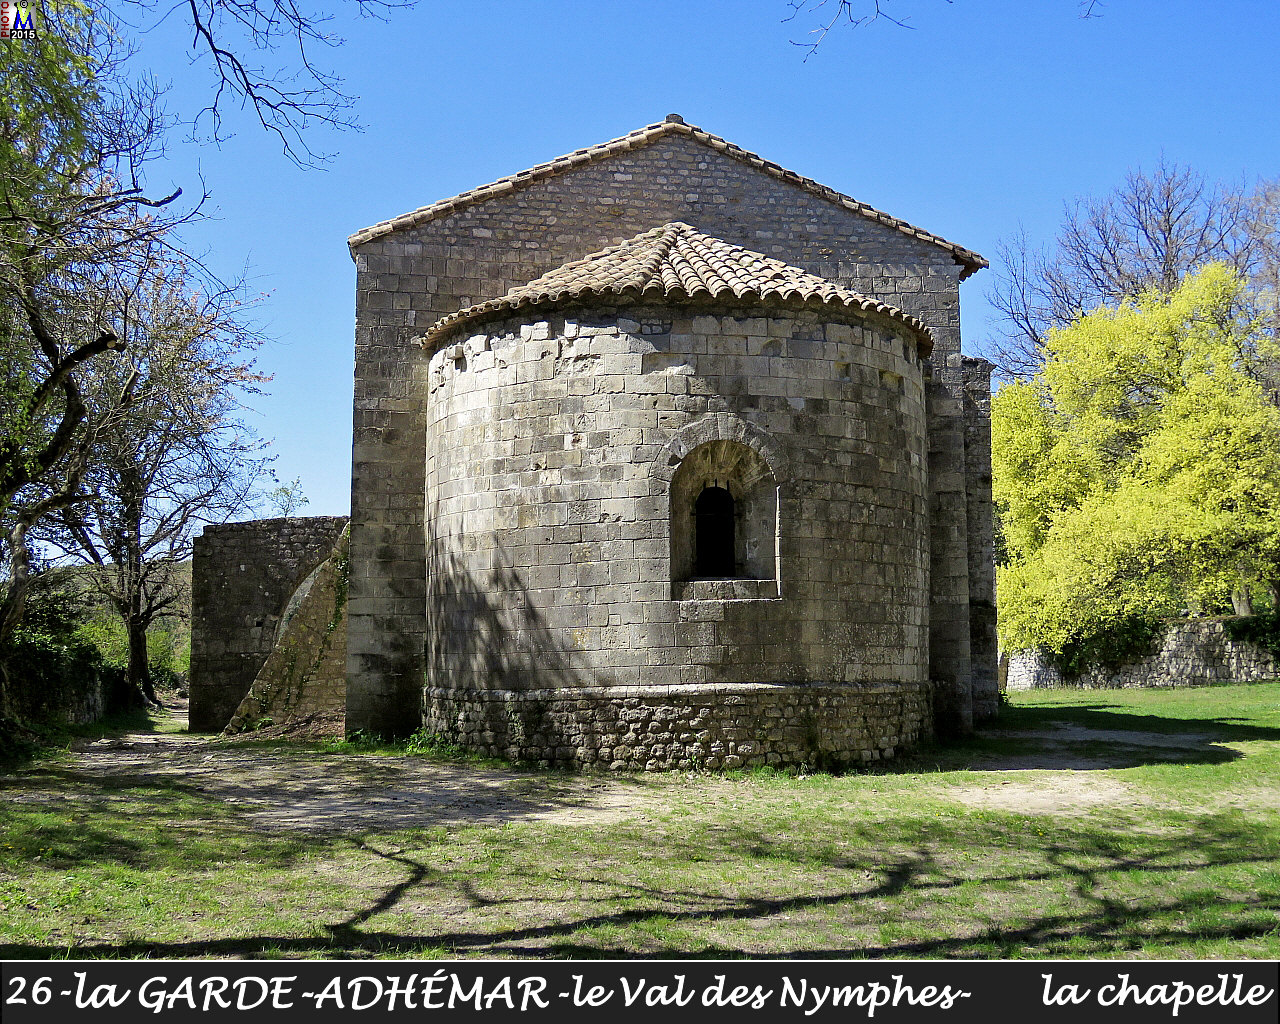 26GARDE-ADHEMARzVAL-NYMPHES_chapelle_104.jpg